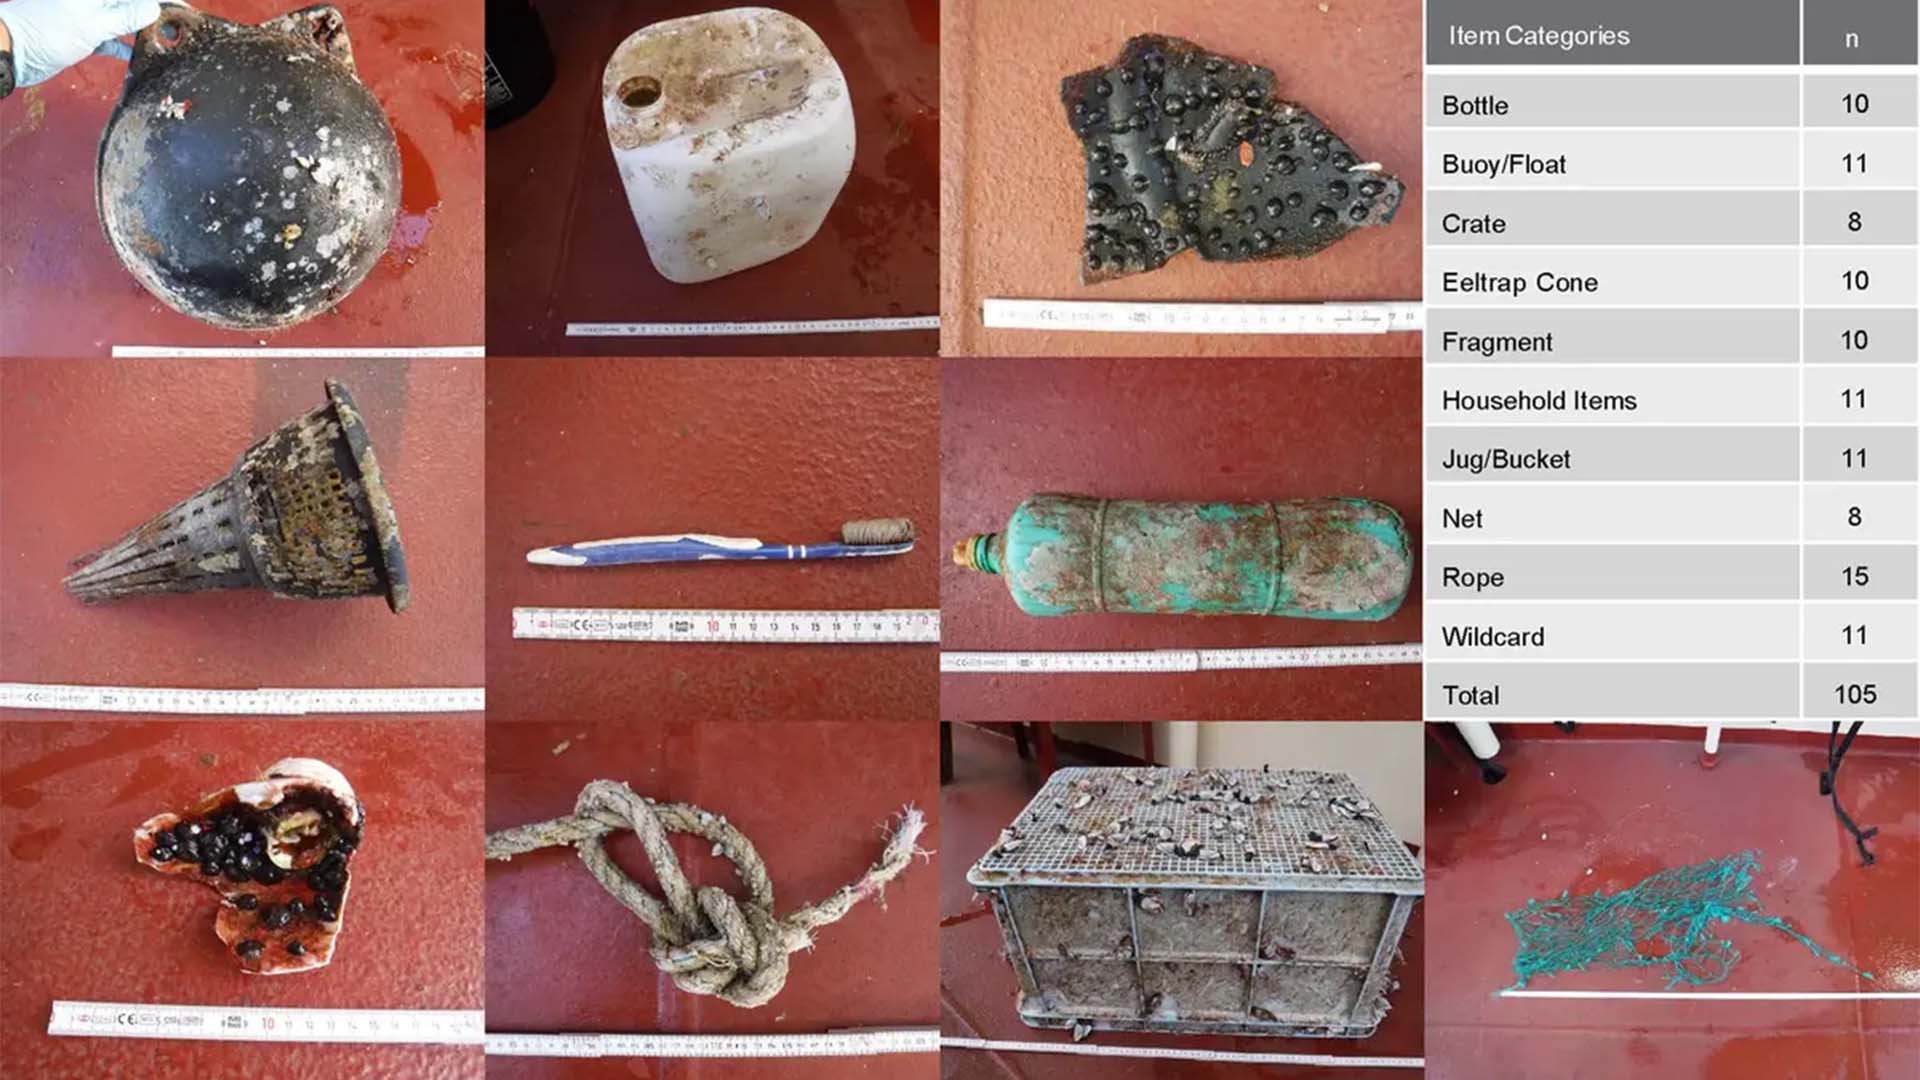 Marine debris categories collected for analysis